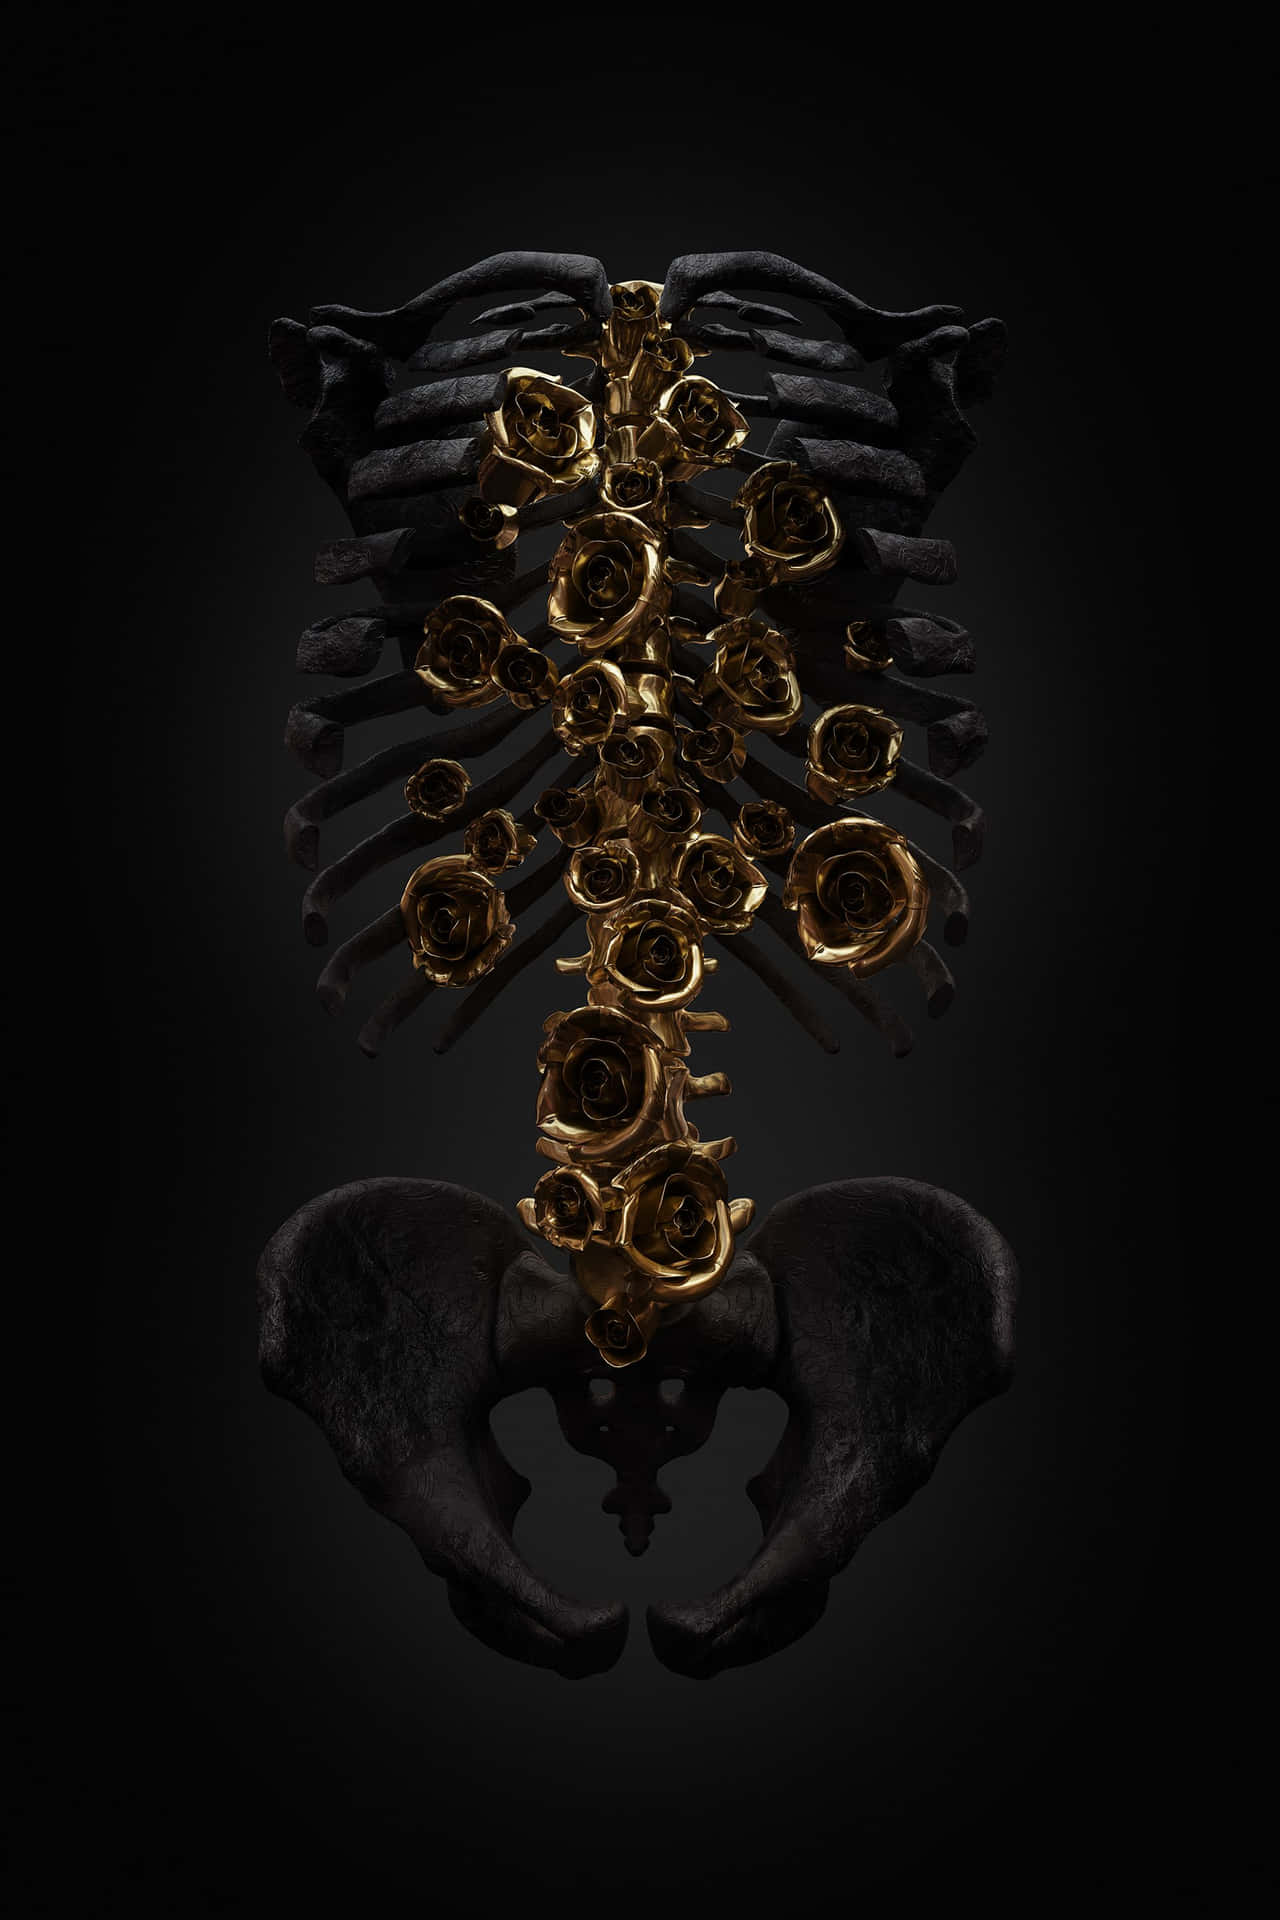 Black And Gold Aesthetic Accessory Wallpaper